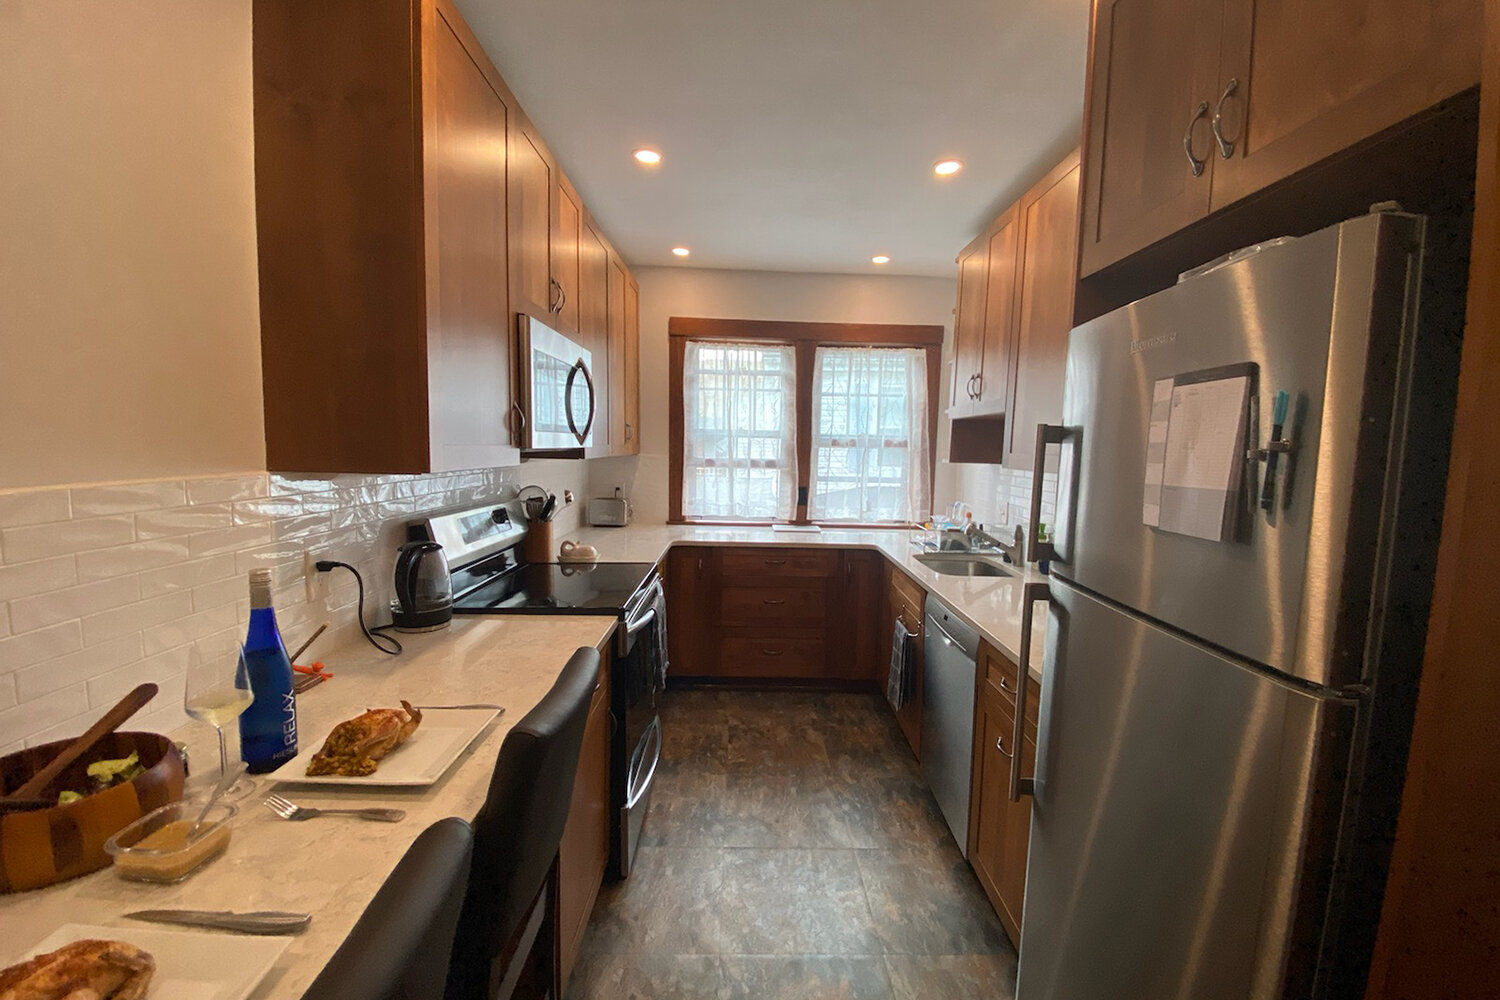 This galley kitchen in Roslindale is a small space, but has plenty of room for beauty and functionality.